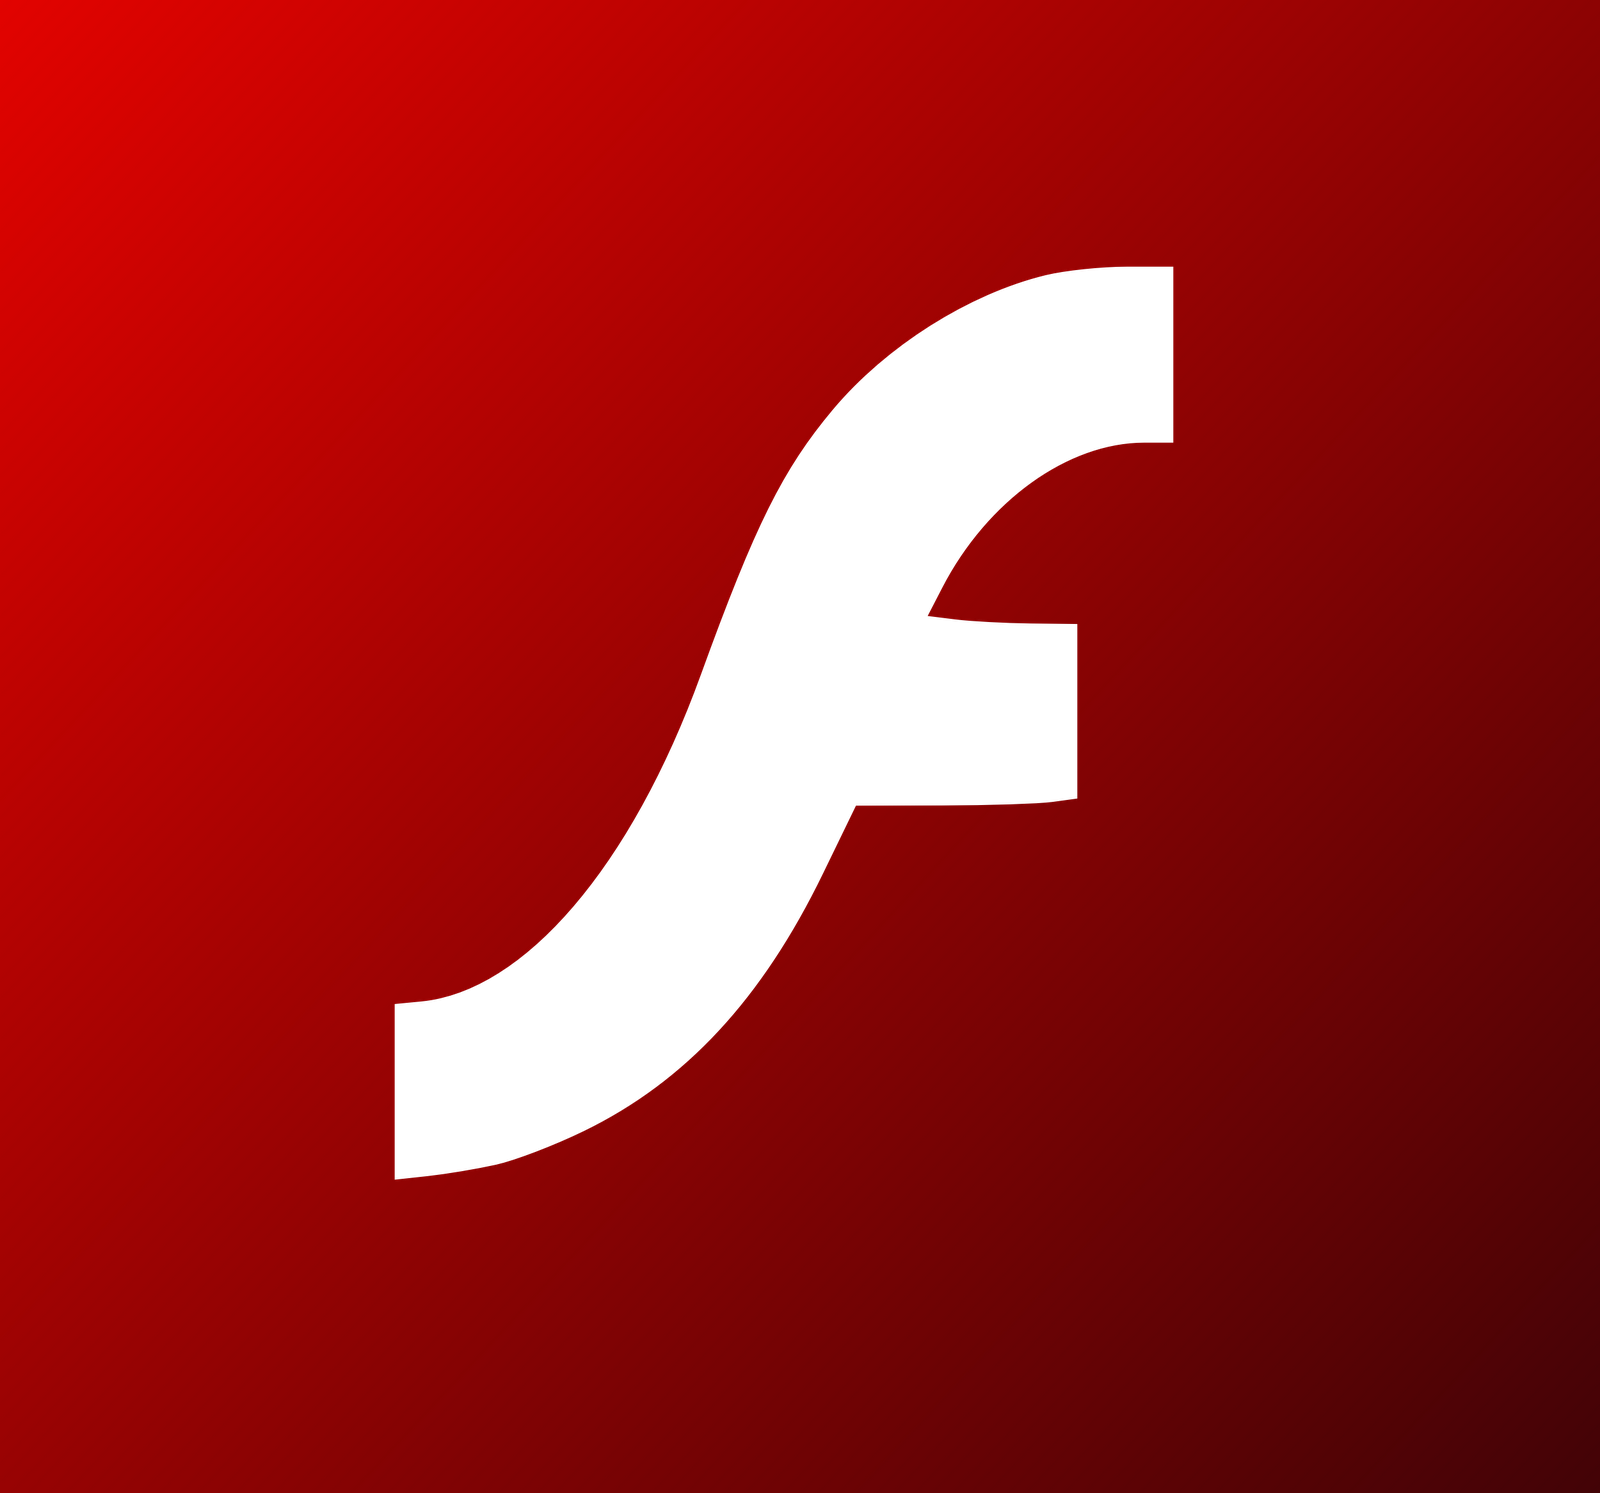 Adobe flash player free download for windows xp cnet download wifi hacker for pc